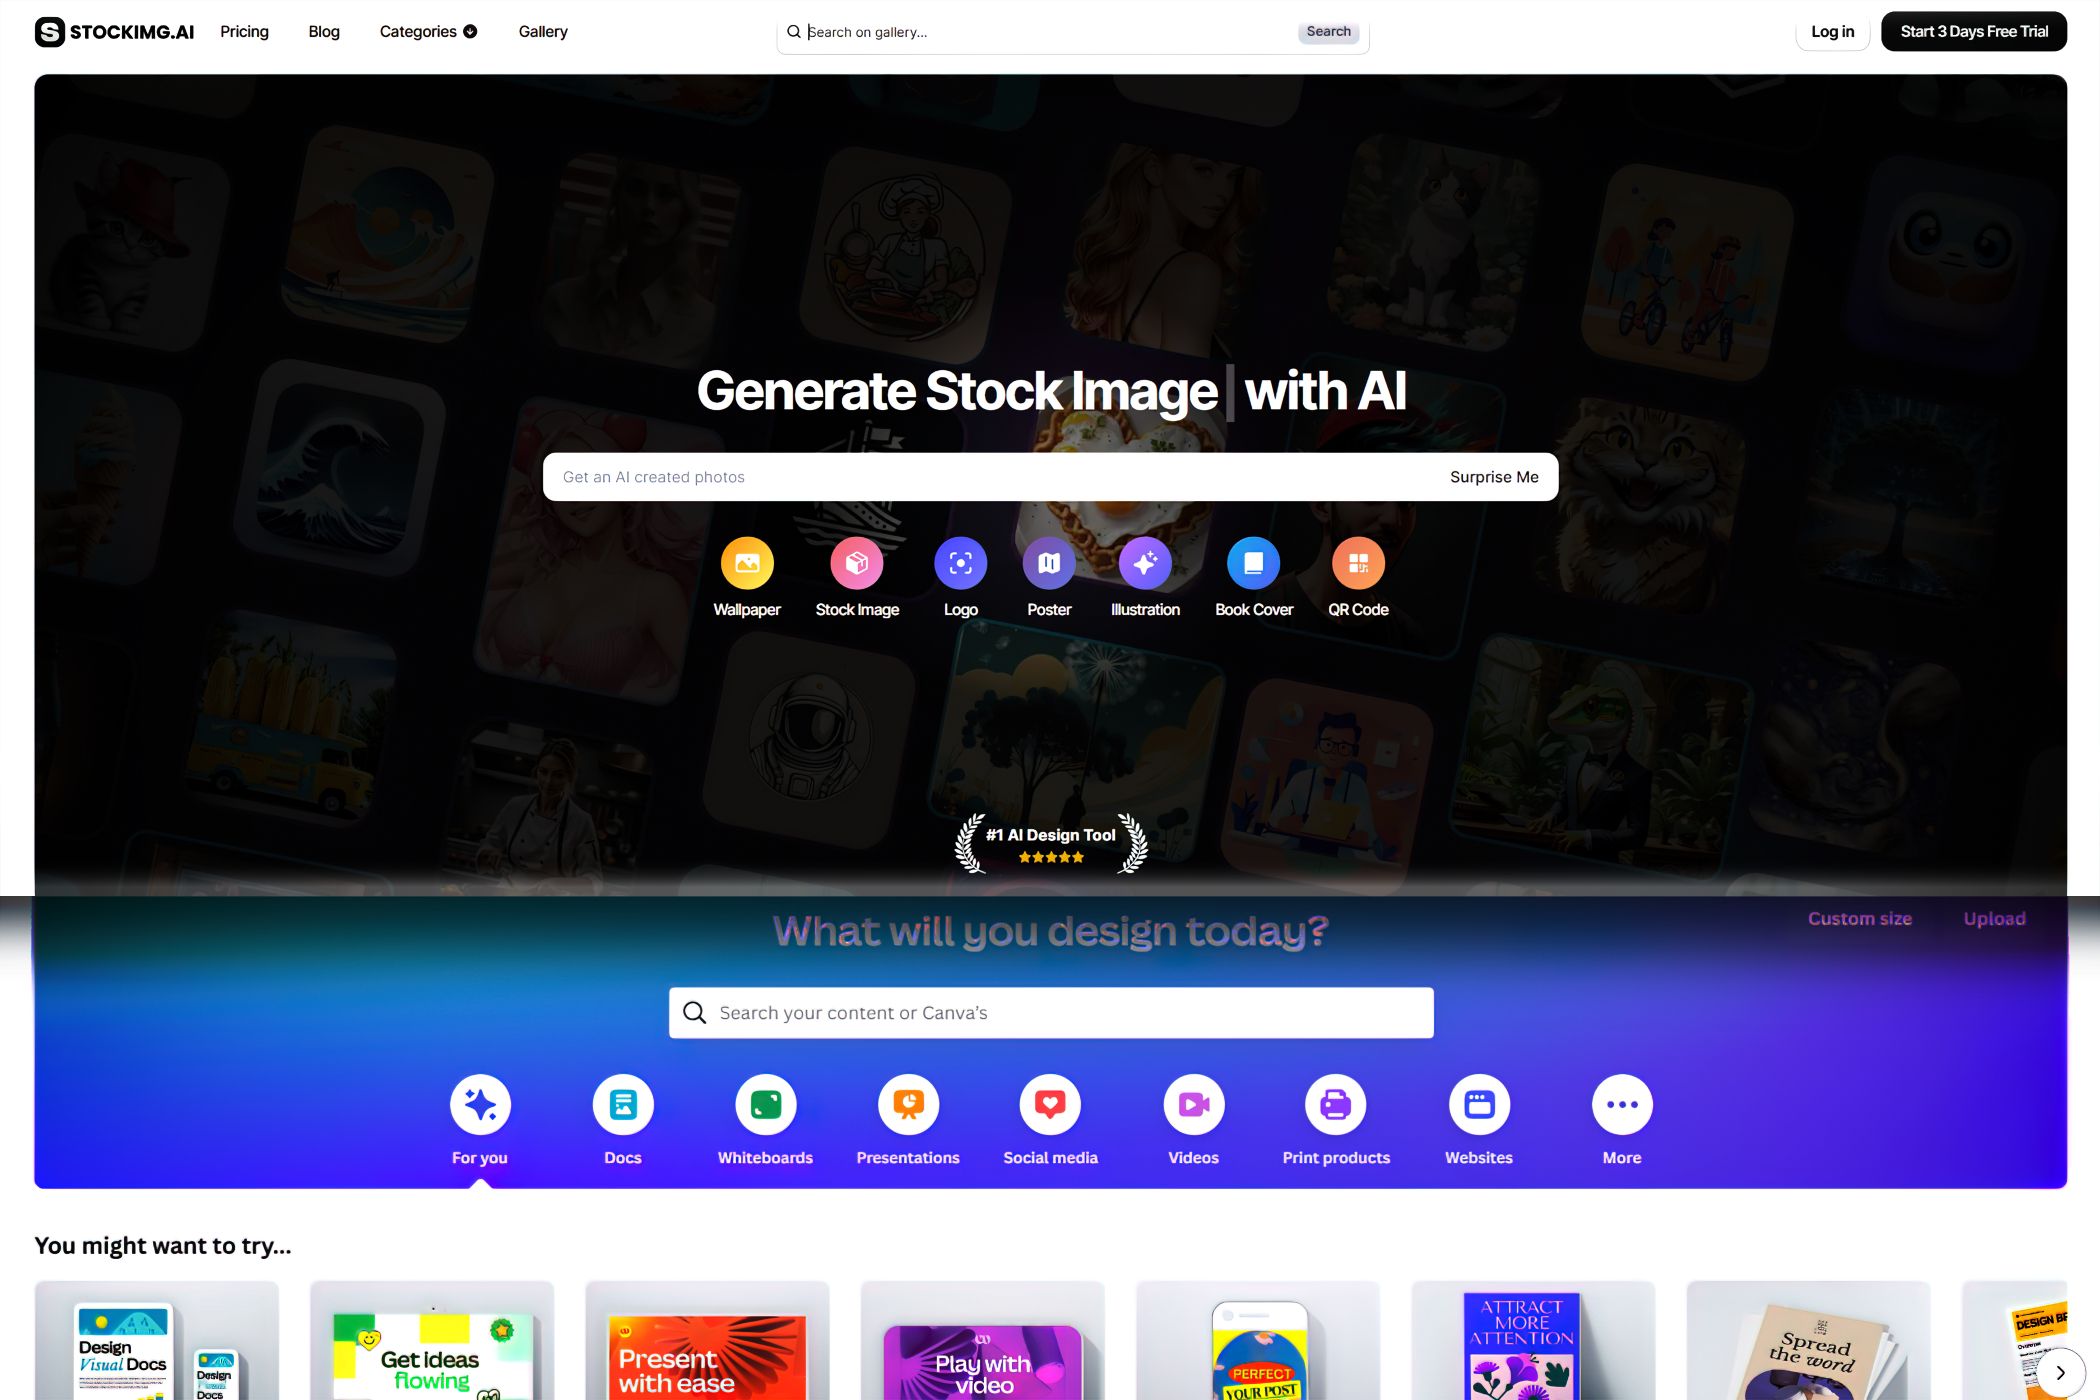 Stockimg.ai and a Canva Interface at the Bottom